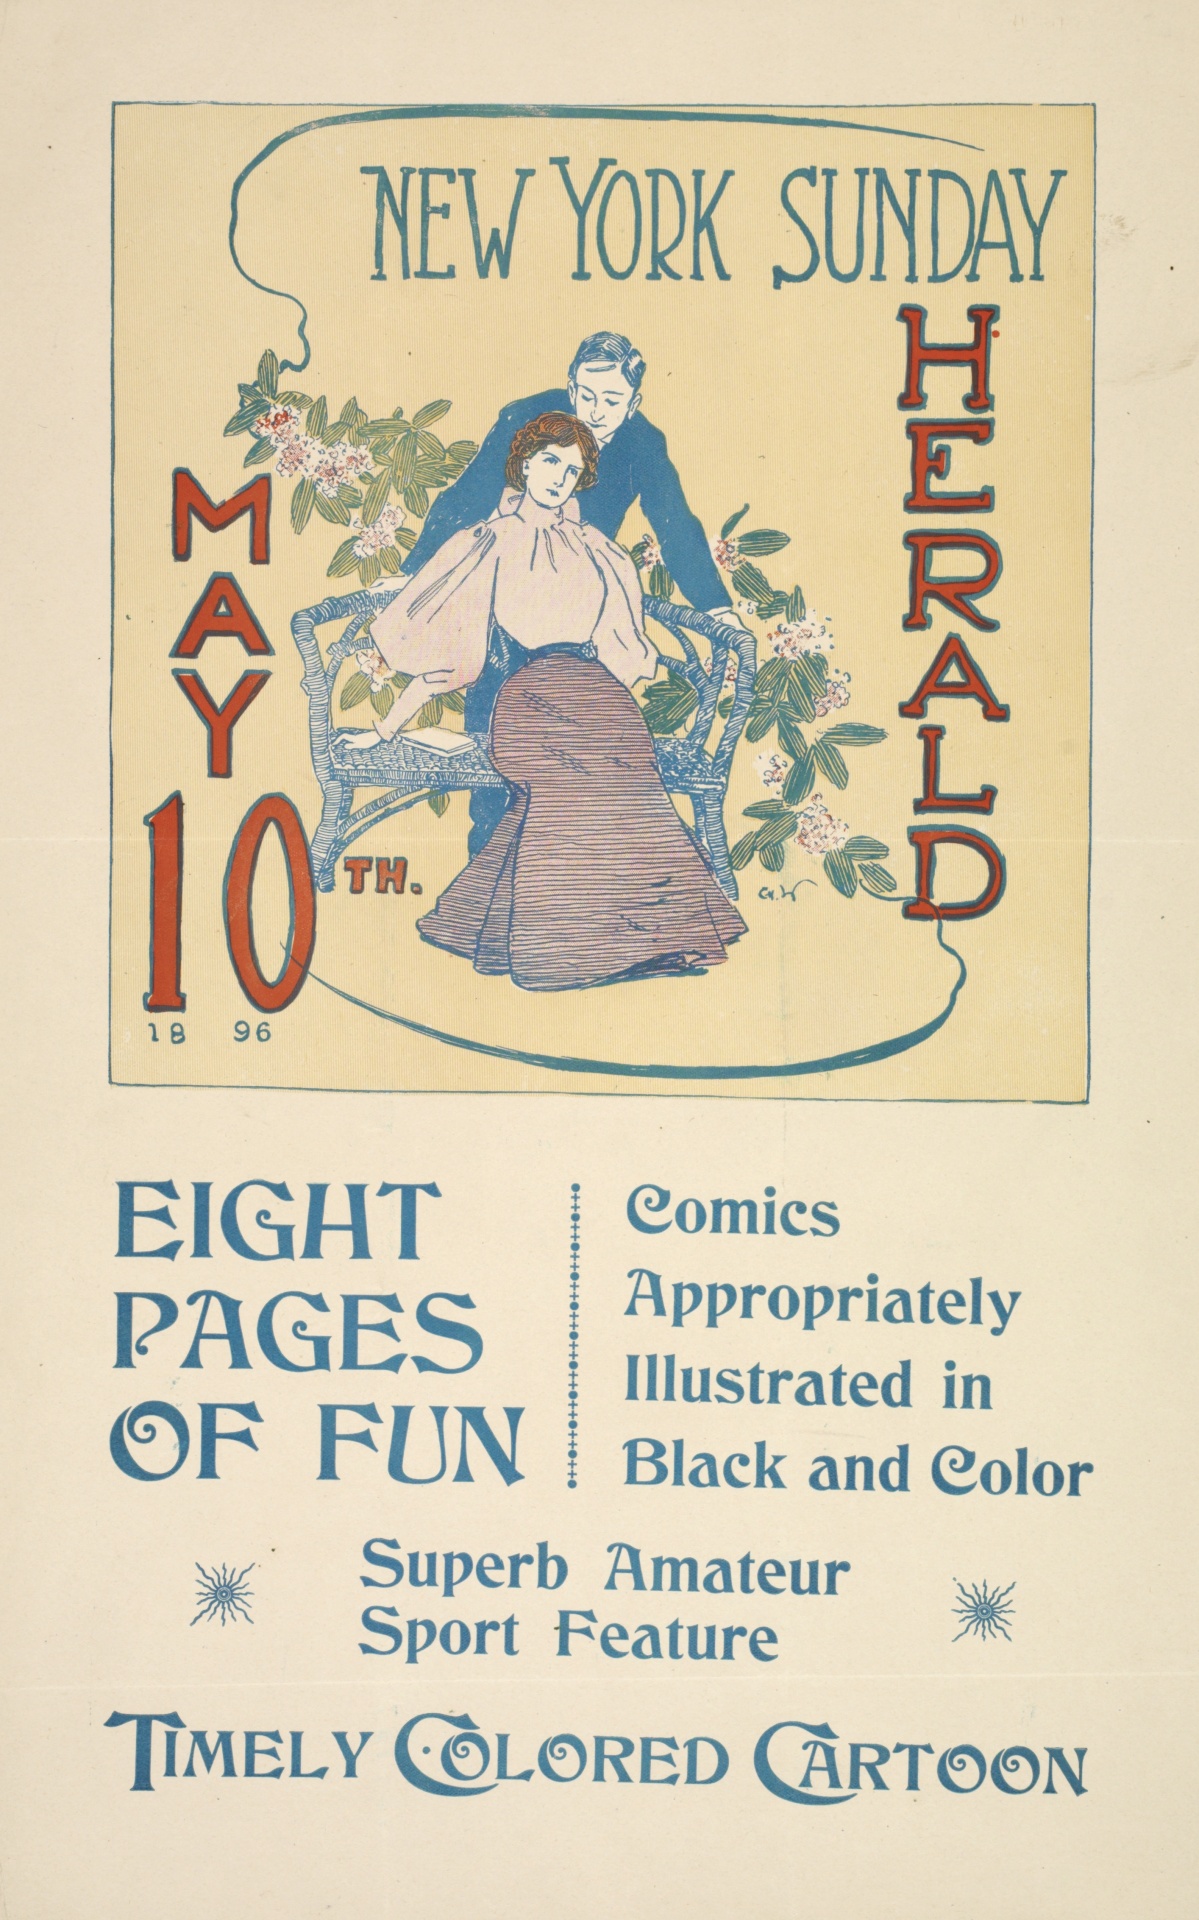 Vintage new york sunday herald newspaper front page poster, print for 1896